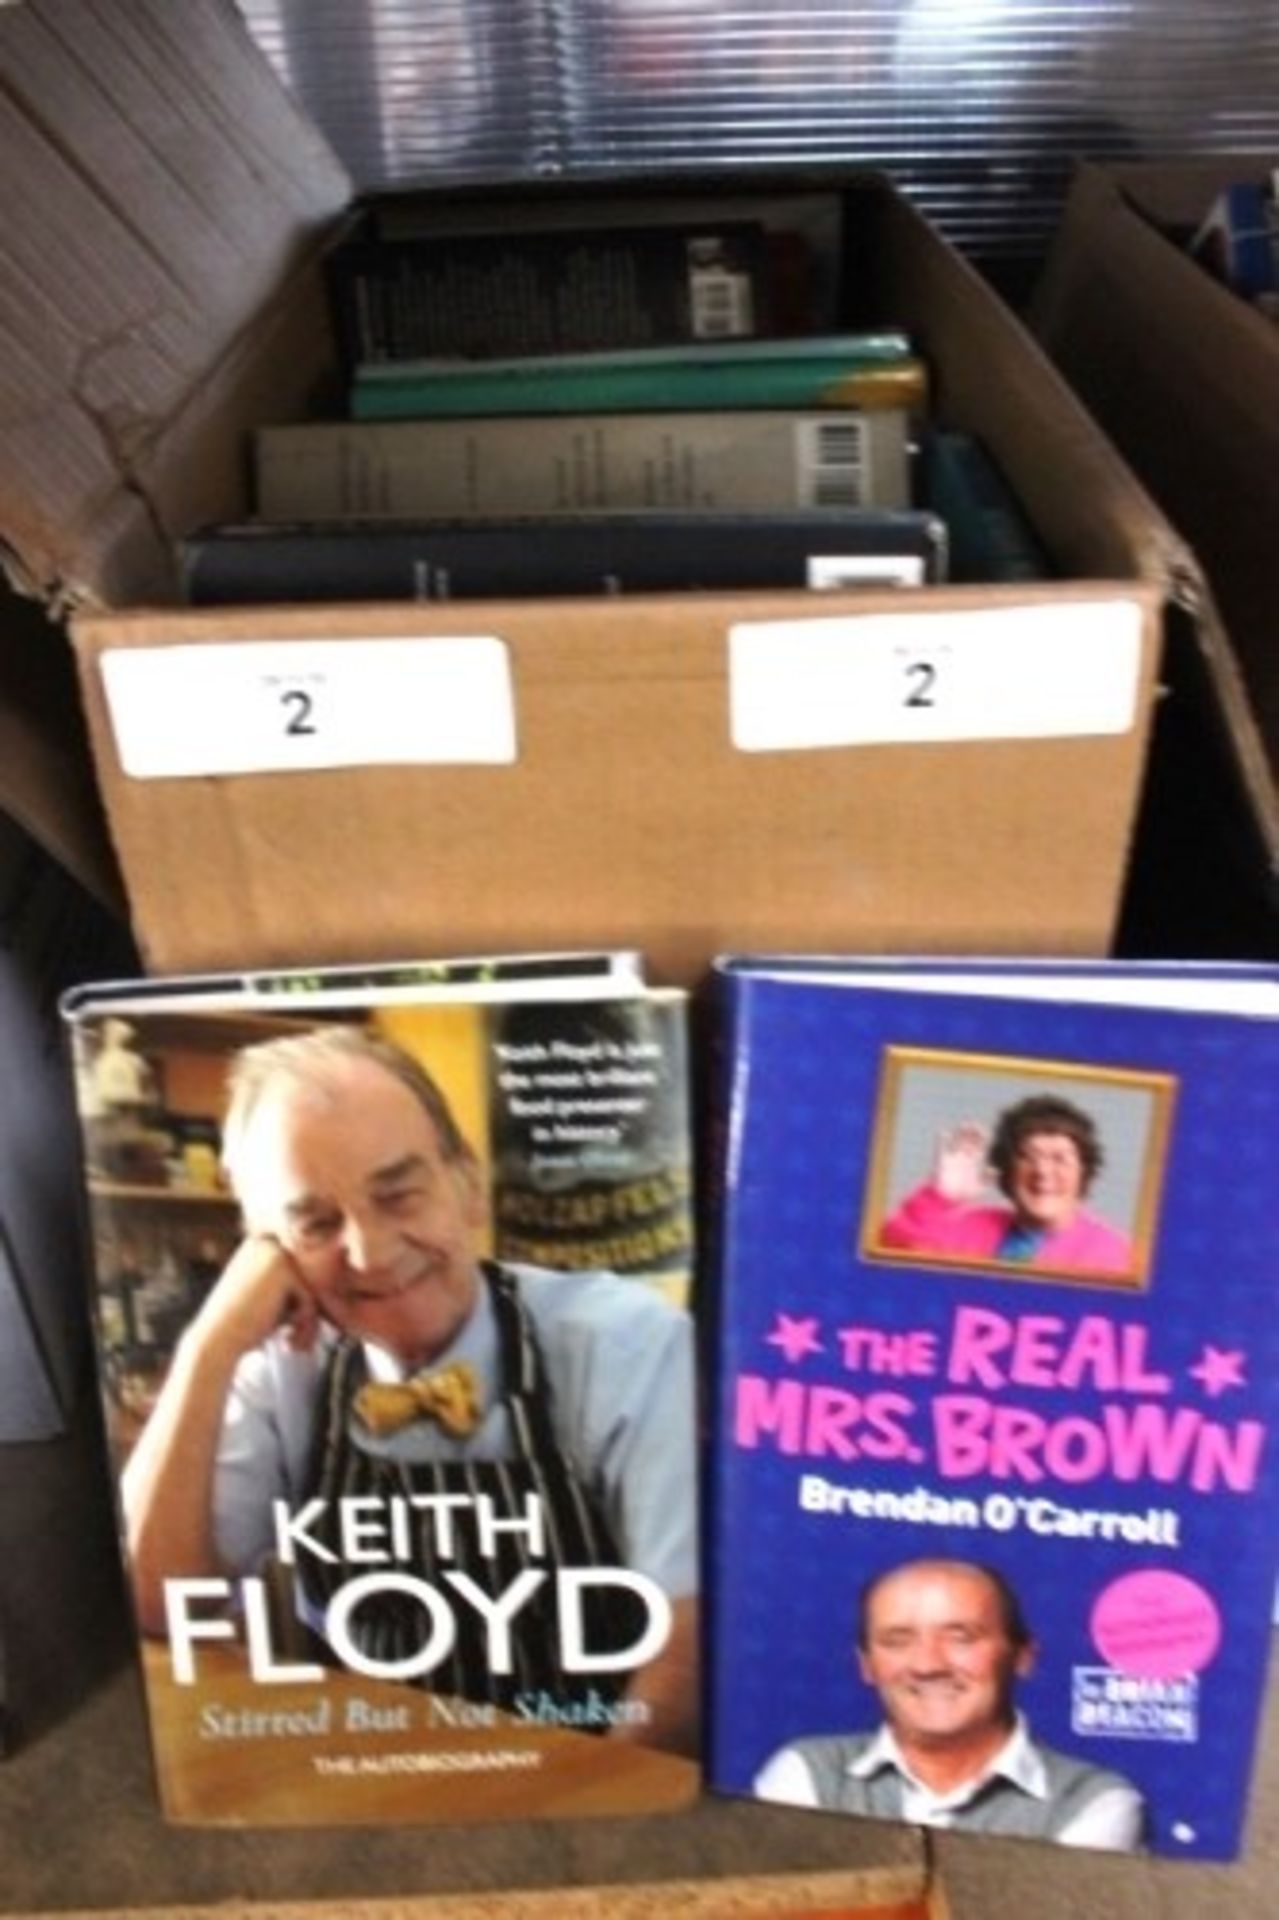 A mixed selection of biography books including Keith Floyd Stirred But Not Shaken - Second hand (